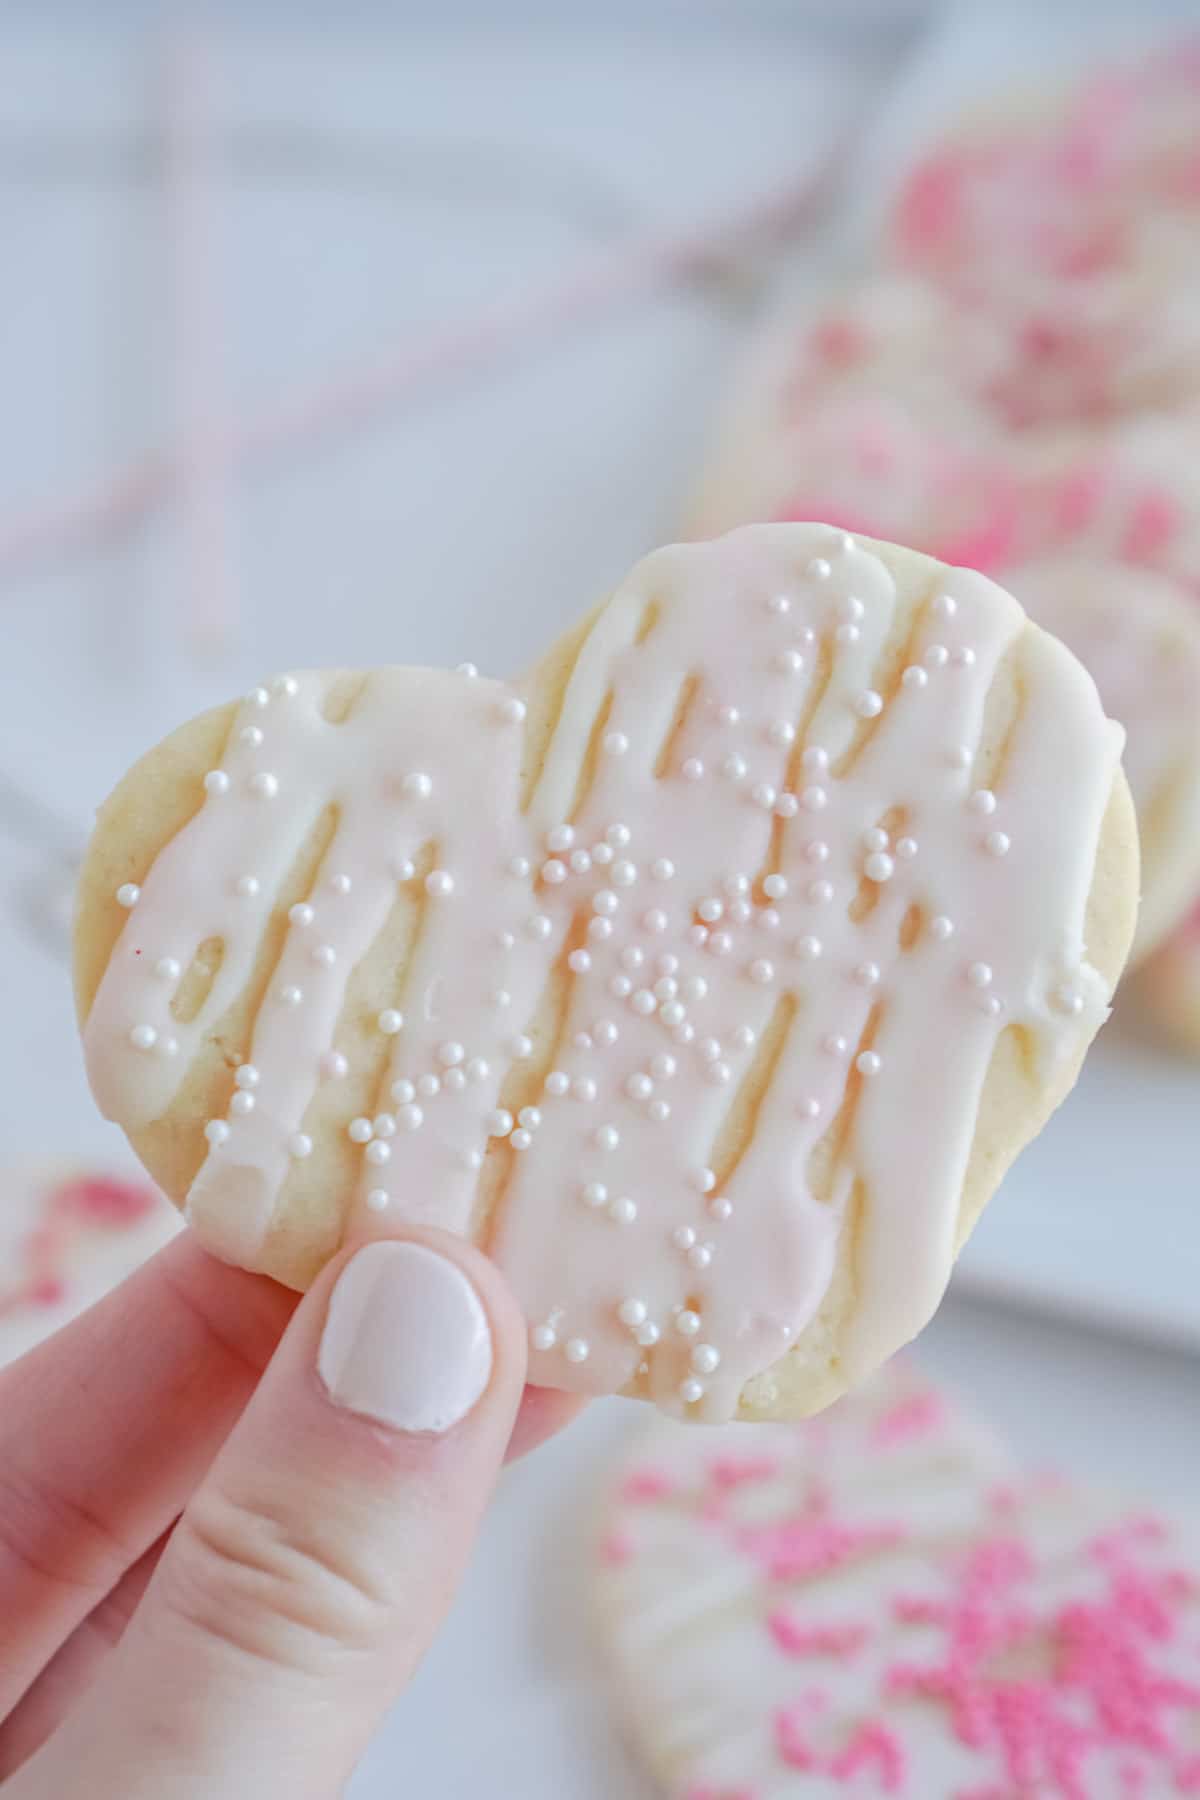 Chocolate Sugar Cookies - Completely Delicious